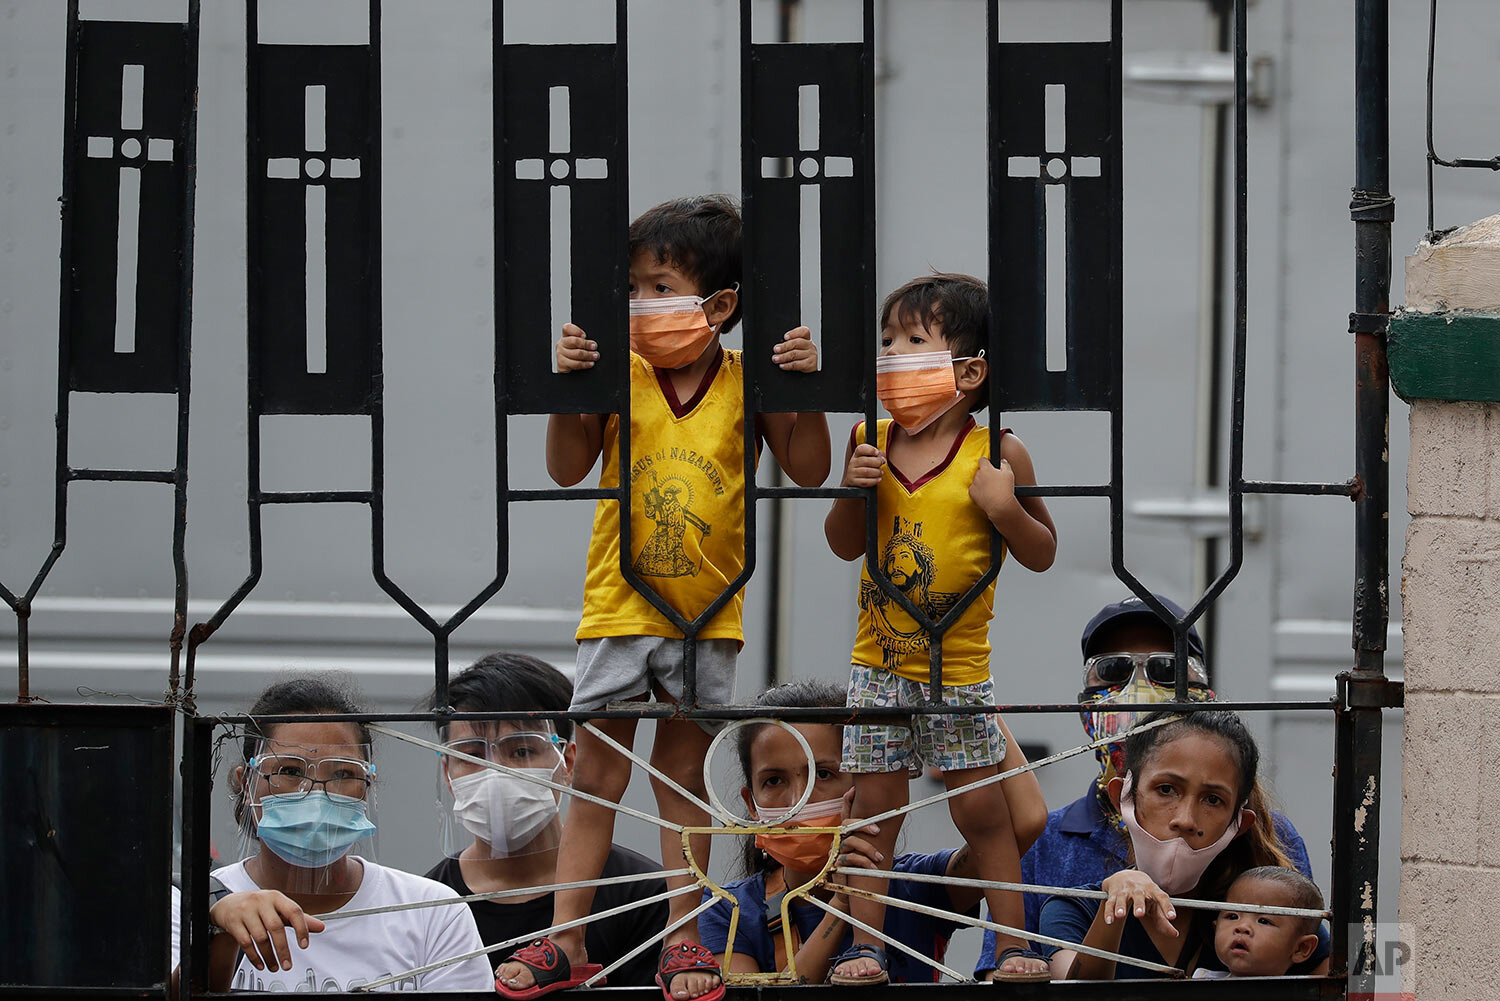  Young Catholic devotees wearing face masks to prevent the spread of the coronavirus stand try to get a glimpse of the the Black Nazarene at the Santa Cruz Church in Manila, Philippines a day before it's feast day on Friday Jan. 8, 2021.  (AP Photo/A